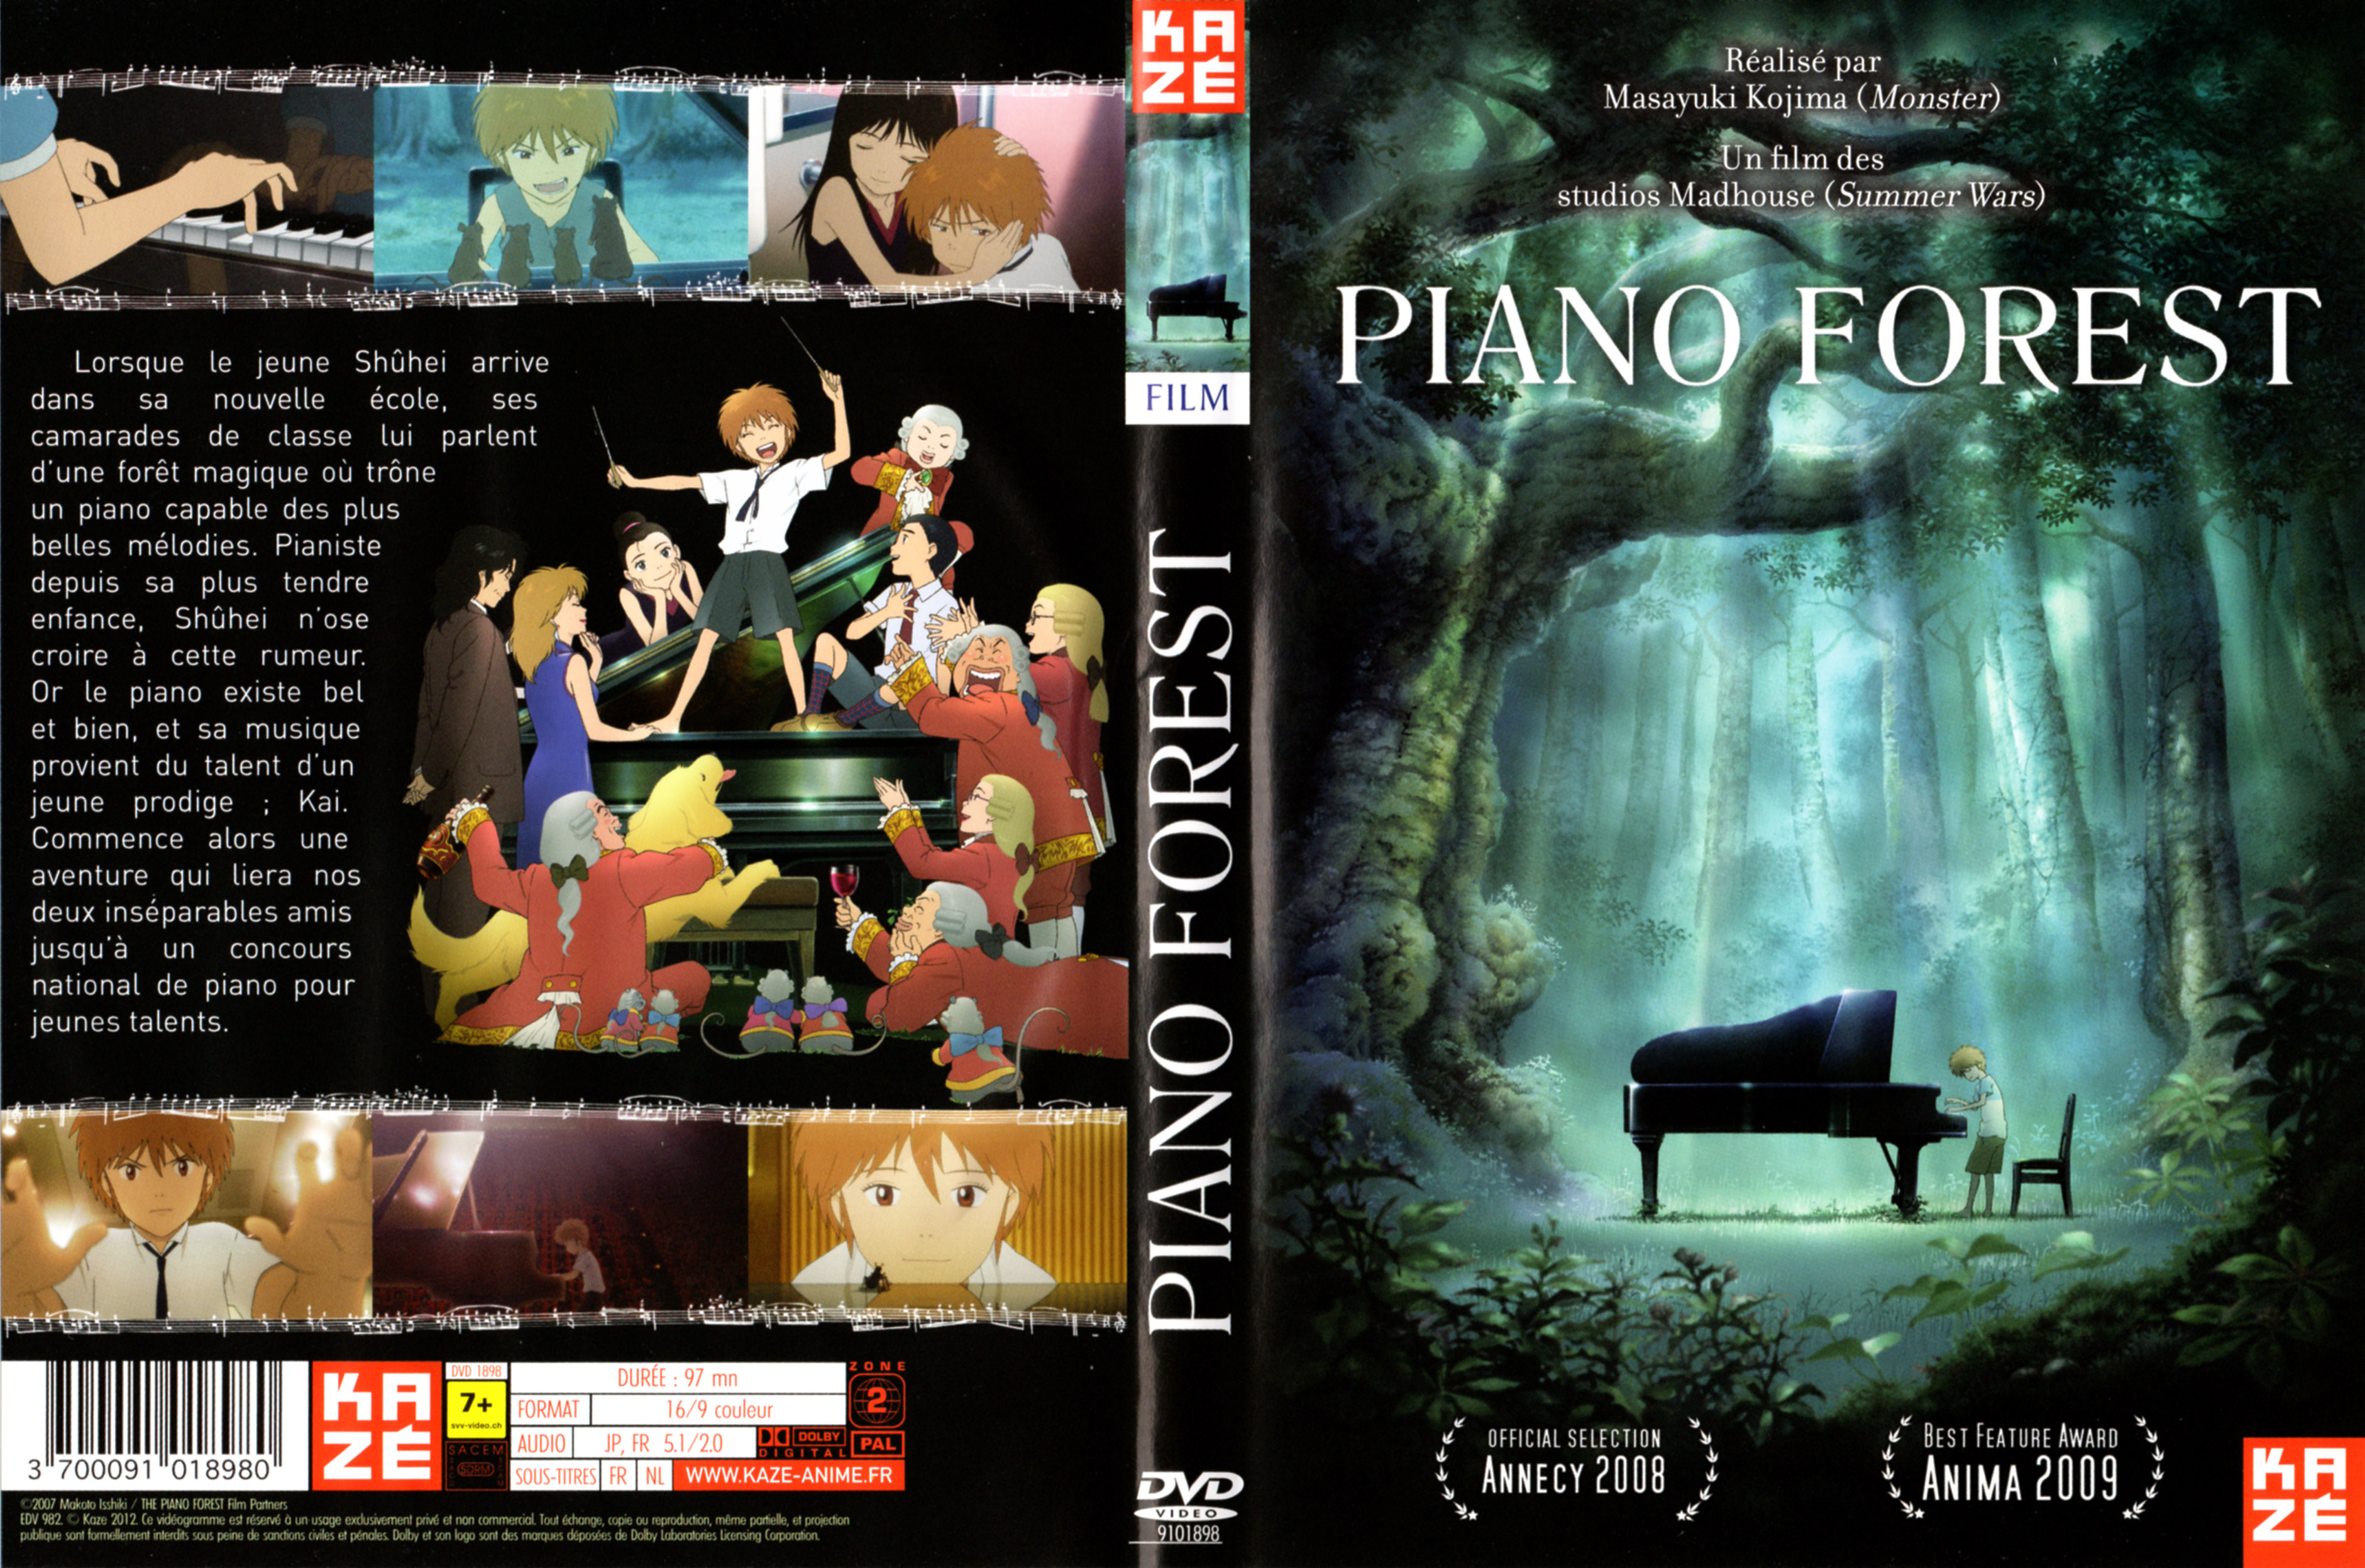 Jaquette DVD Piano forest v2